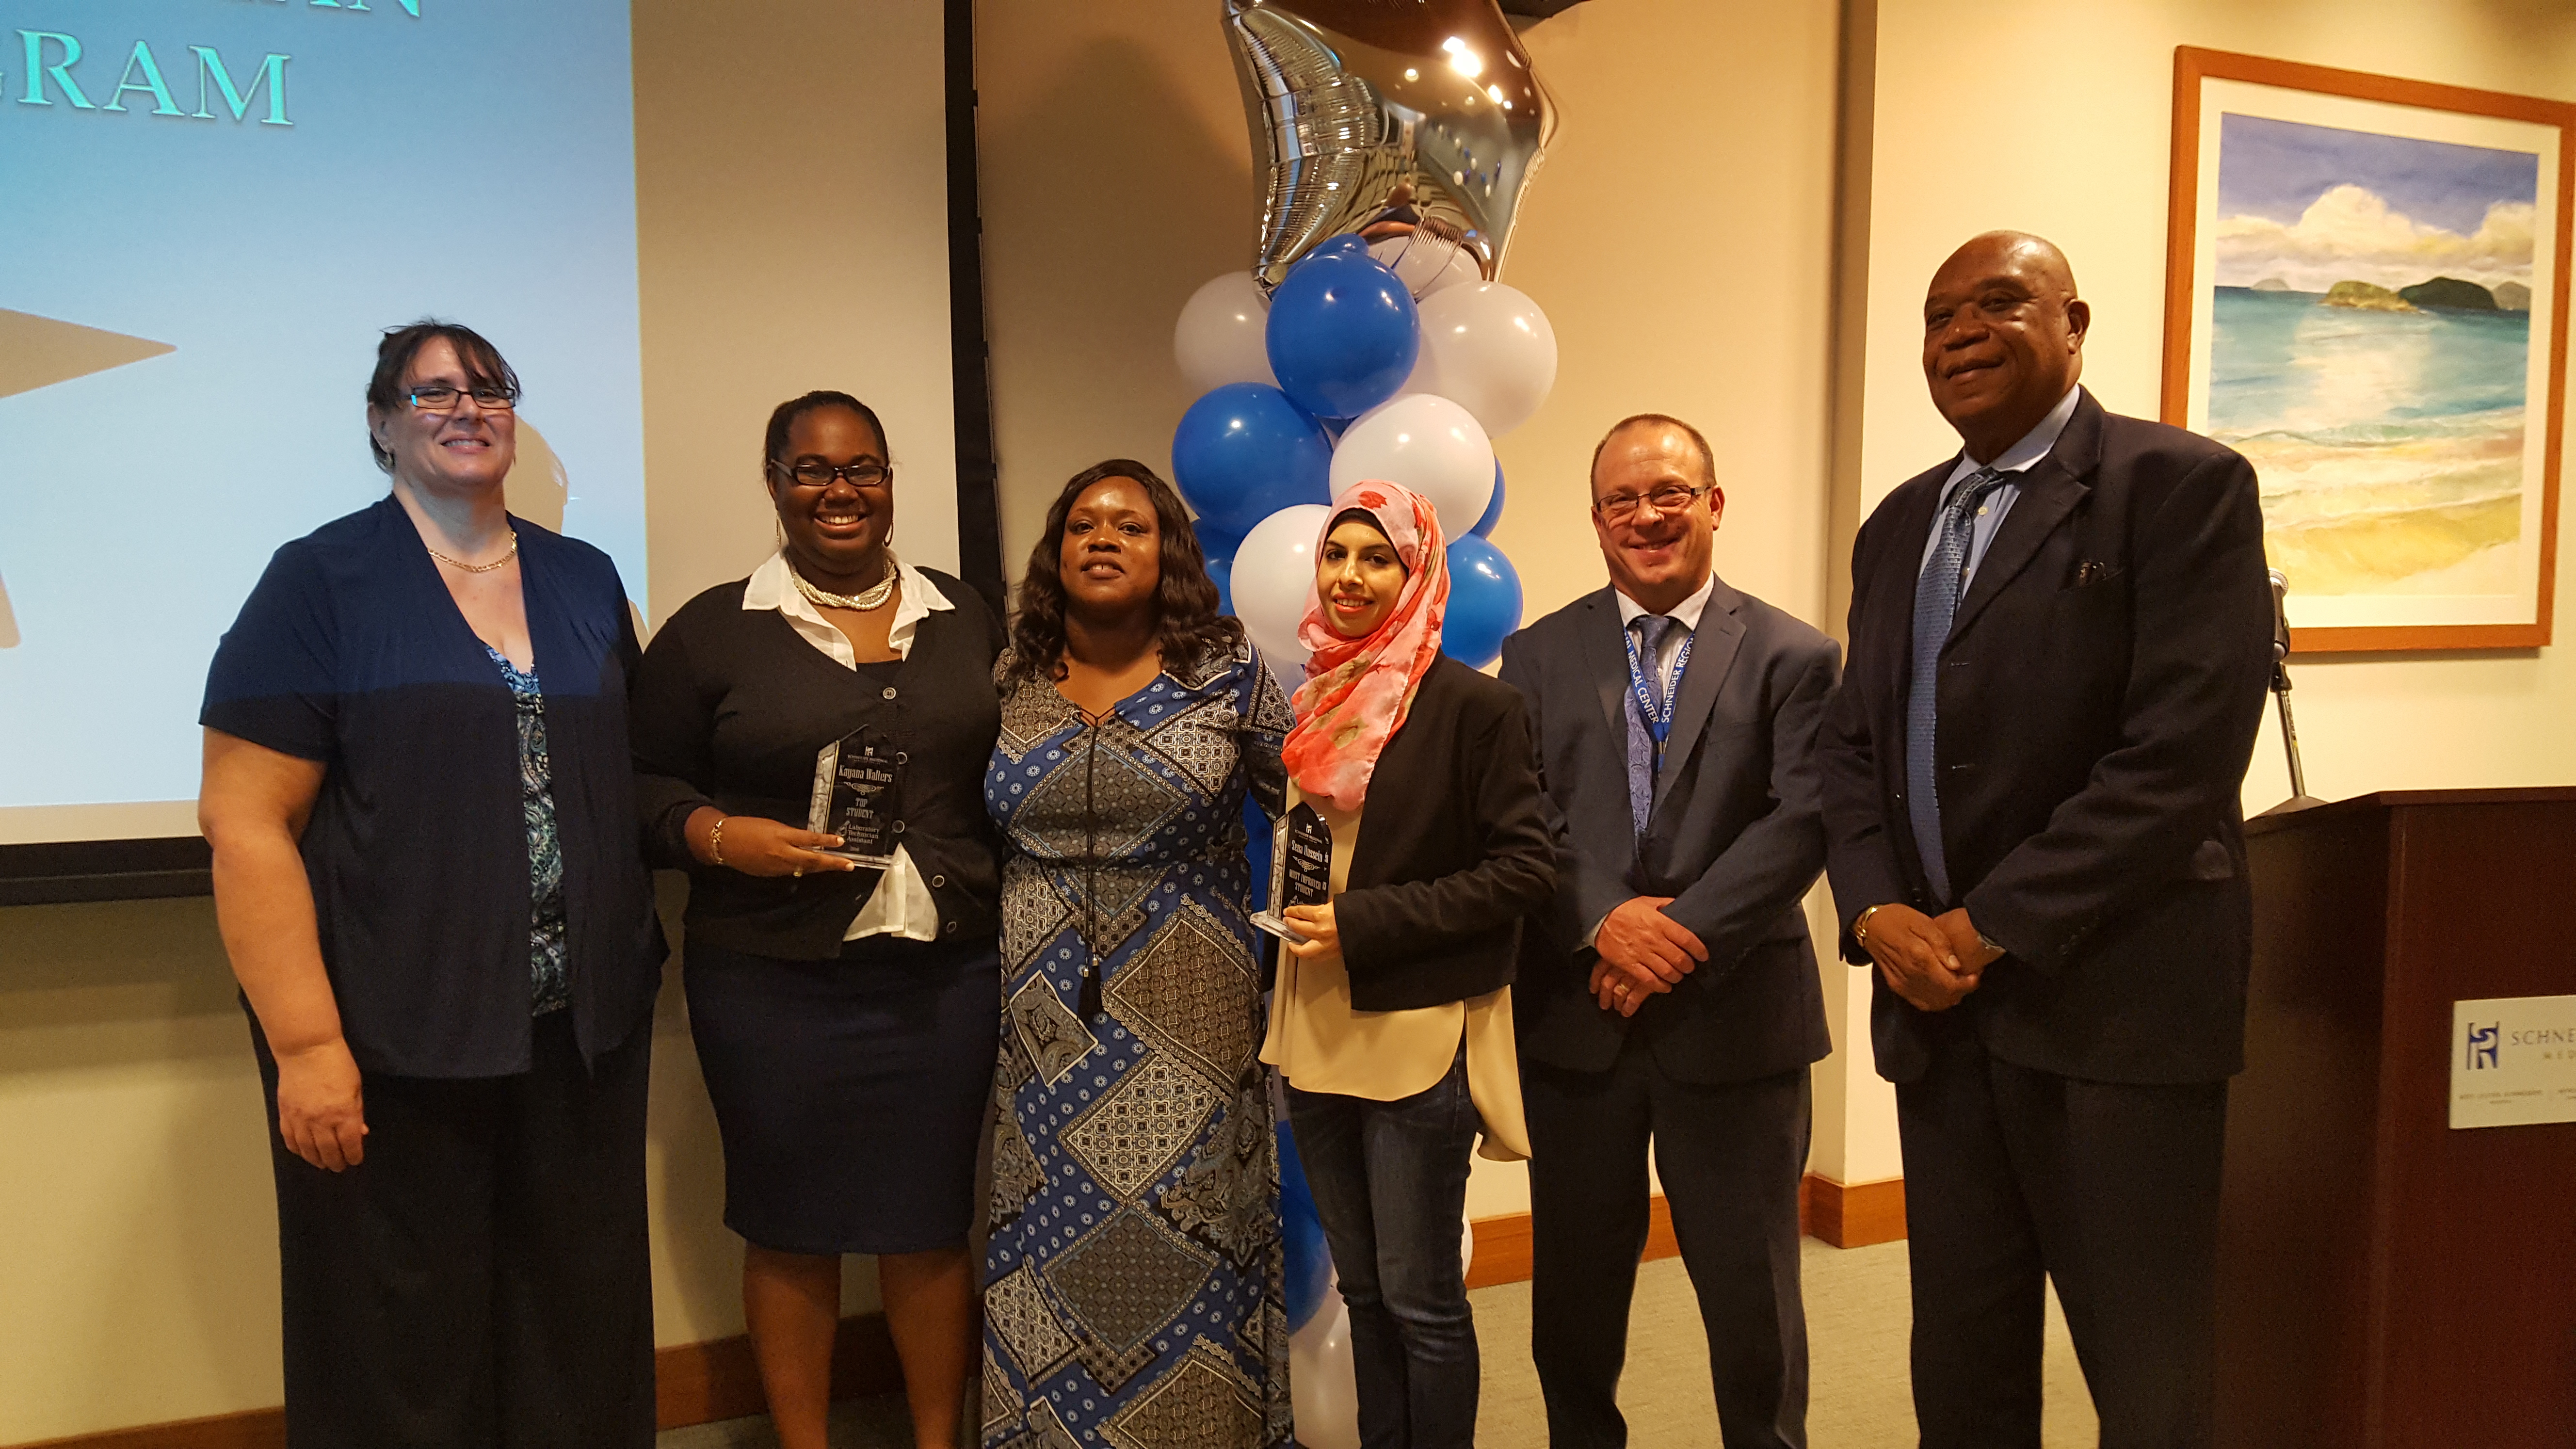 (left to right) Carol Kelly, lead medical technologist at SRMC; Kayana Walters, graduate and valedictorian of class; Mauritza Phillip, clinical laboratory director; Sena Hussein, graduate; Charles Nickerson, SRMC VP of Operations; Bernard Wheatley, SRMC CEO; (not pictured - graduate Amira Plaskett)